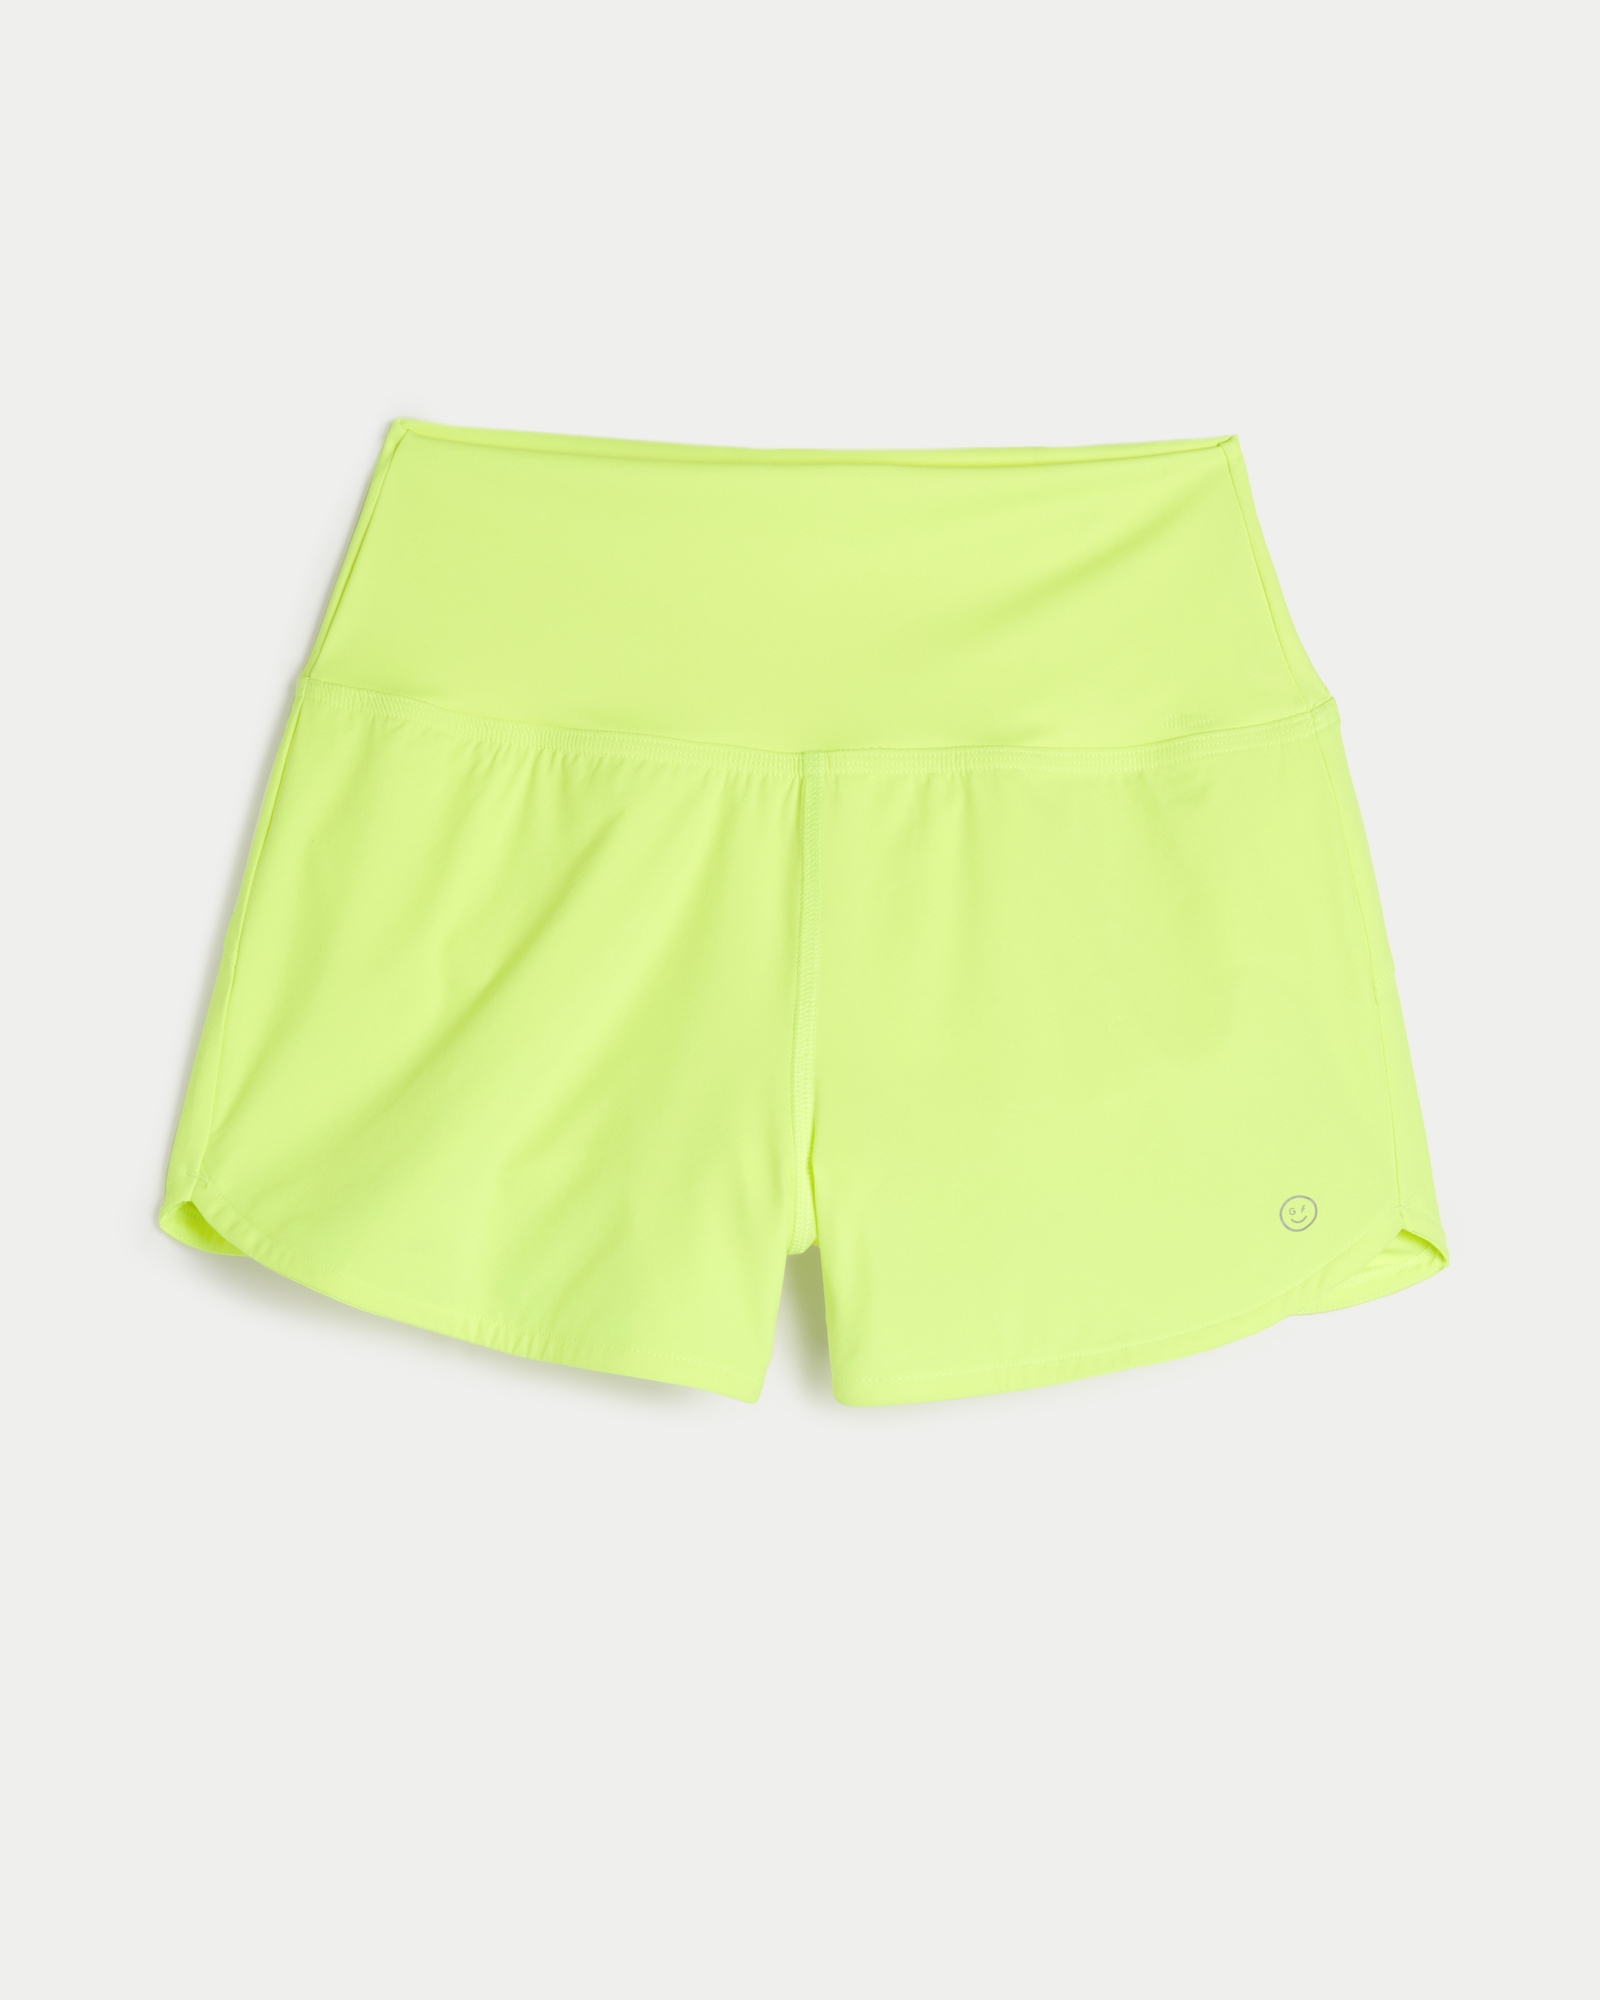 Women's Gilly Hicks Active Lined Shorts 3, Women's Clearance